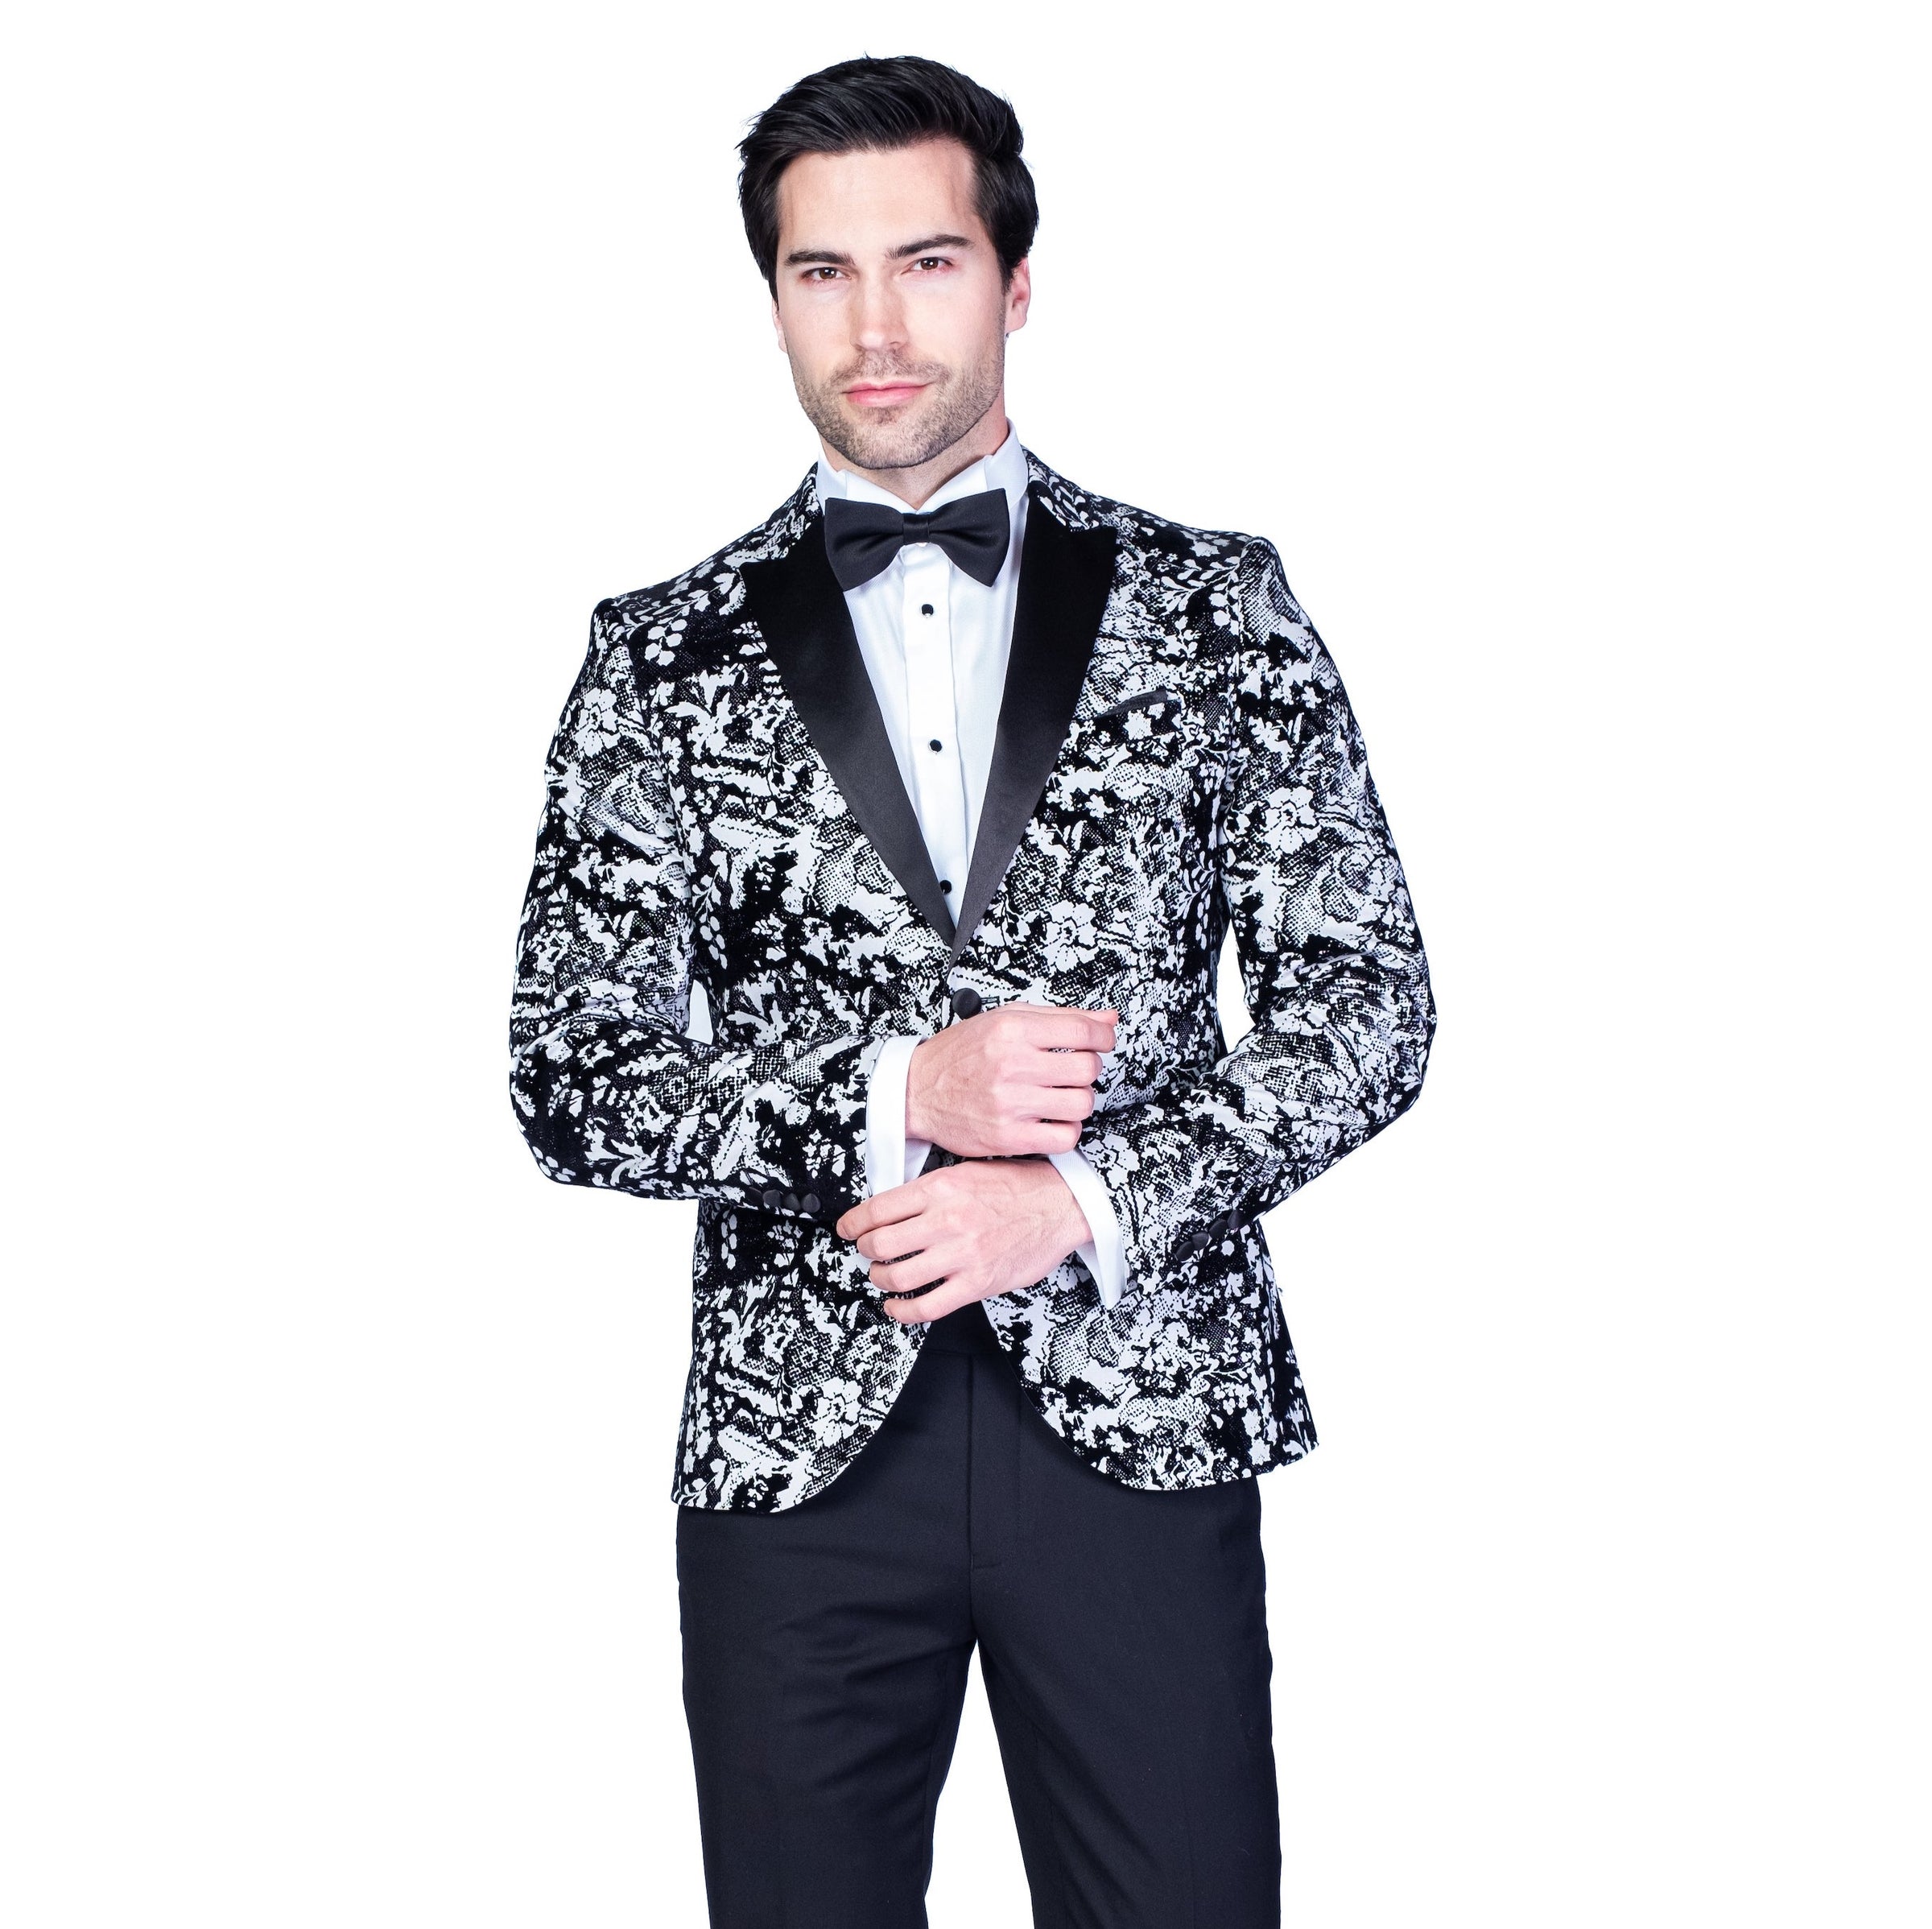 Stars & Strauss - Online Store for Suits, Dress Shirts & Menswear